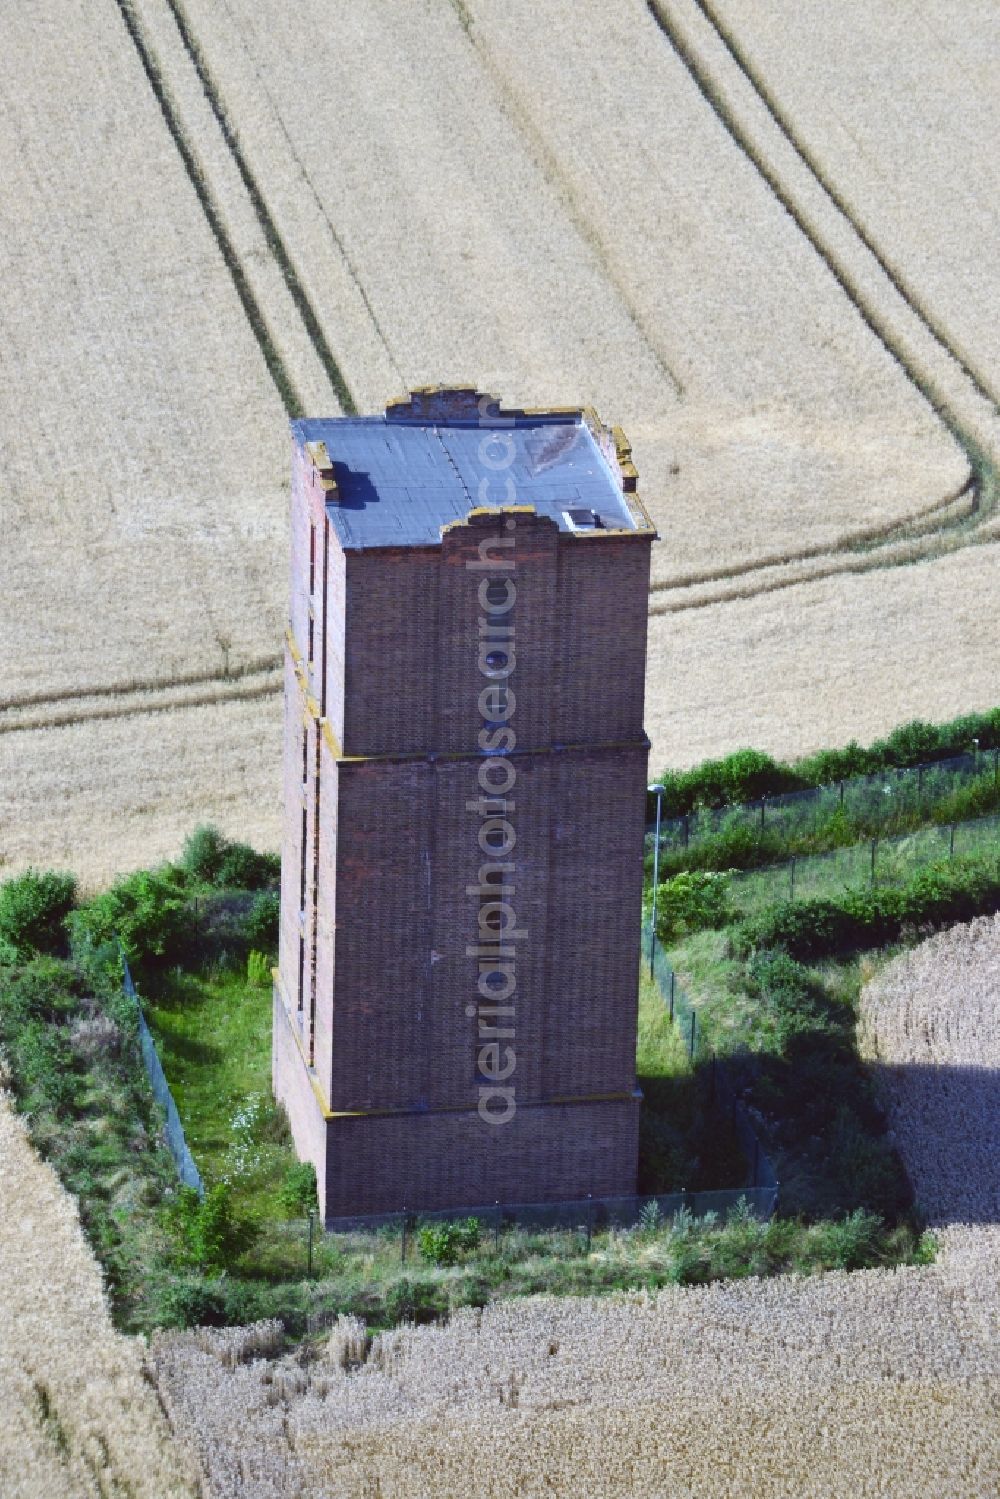 Aerial photograph Langendorf - Historic Water Tower Obergreisslau on the outskirts of Langendorf in Saxony-Anhalt